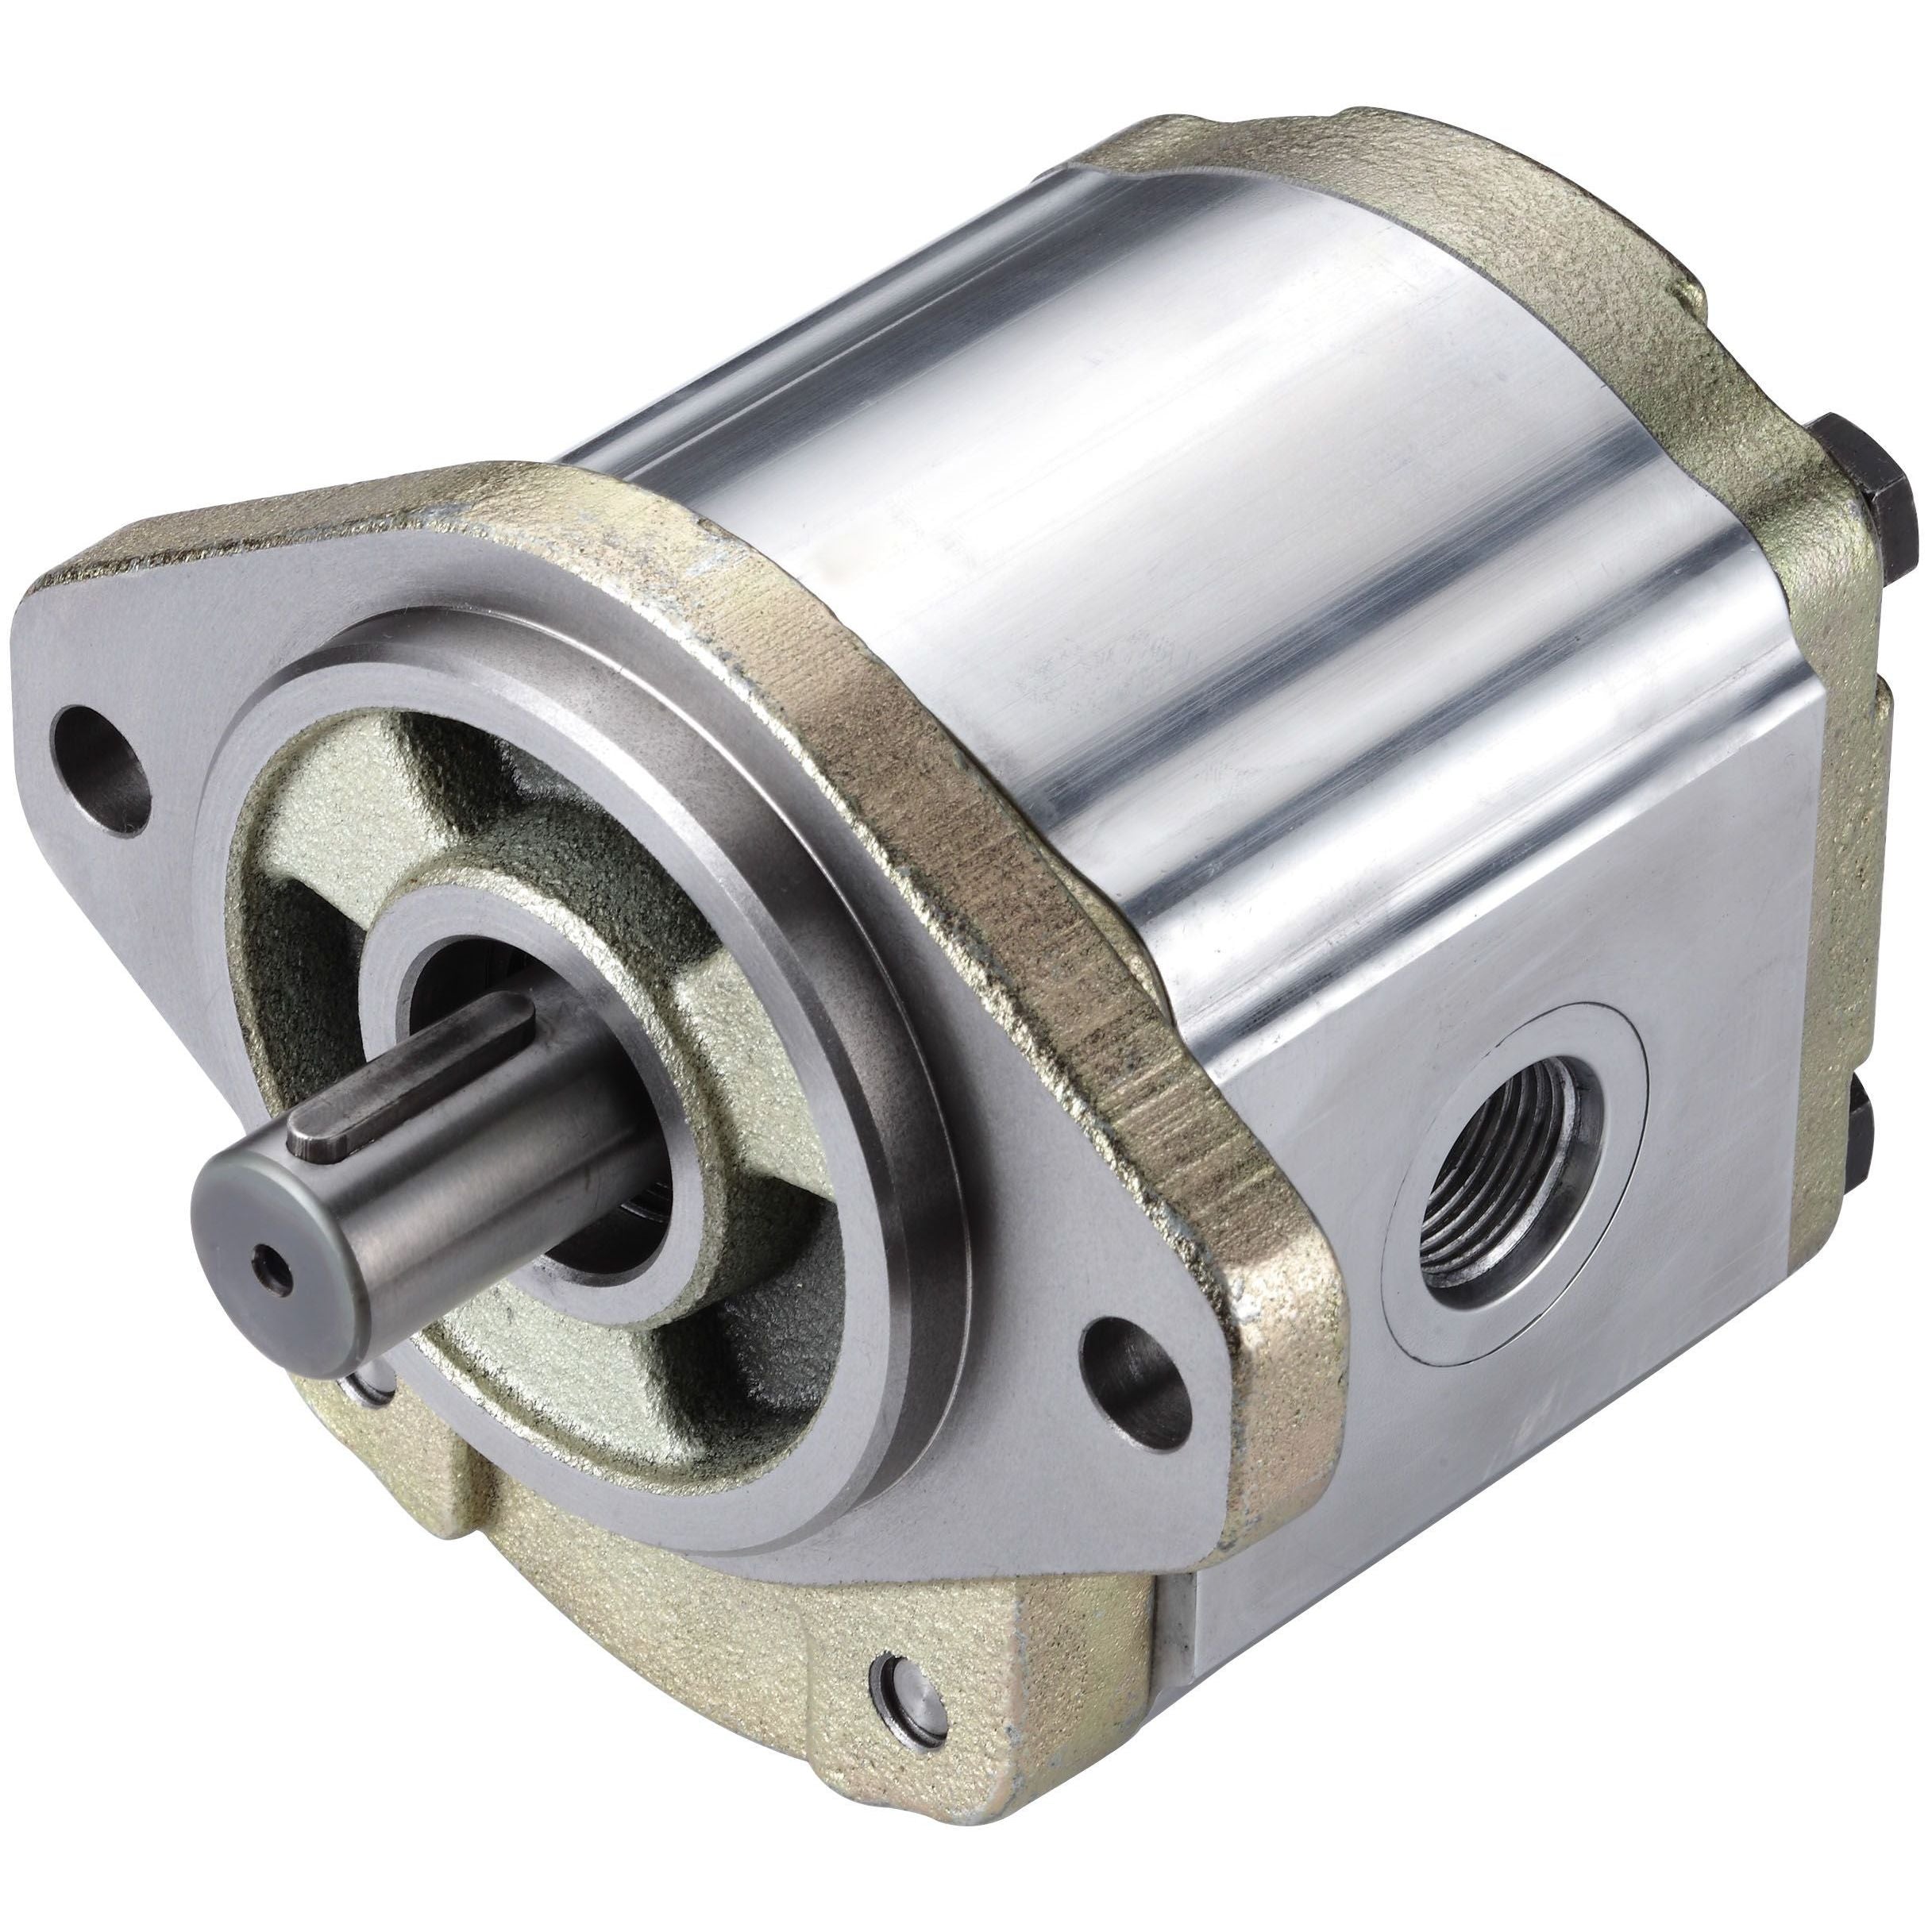 3GB8U328R : Honor Gear Pump, CW Rotation, 28cc (1.71in3), 13.31 GPM, 3500psi, 3000 RPM, #24 SAE (1.5") In, #16 SAE (1") Out, Splined Shaft 13-Tooth, 16/32 Pitch, SAE B 2-Bolt Mount